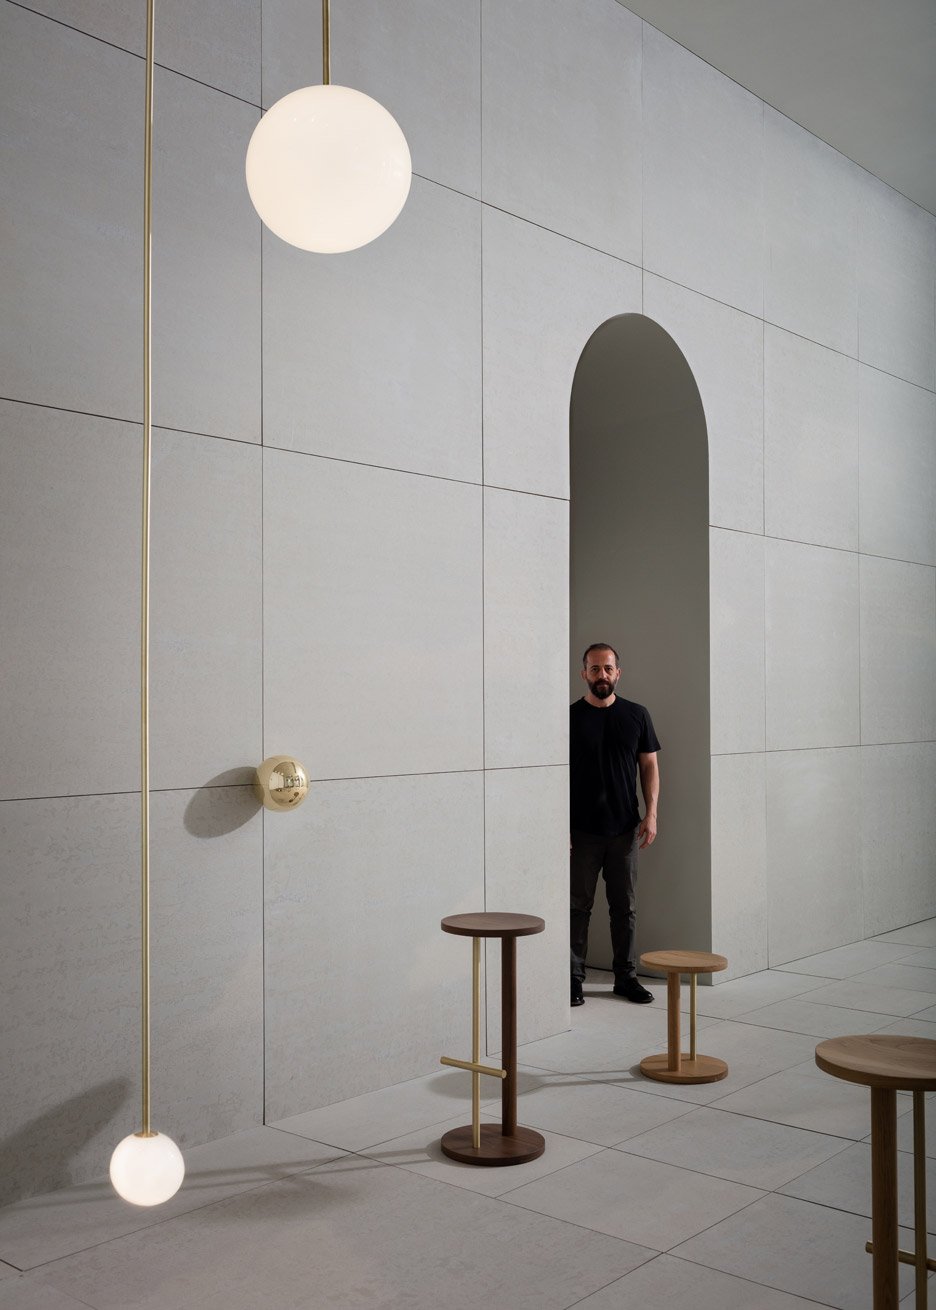 The Double Dream of Spring product exhibition by Michael Anastassiades for Herman Miller at Milan Design Week 2016